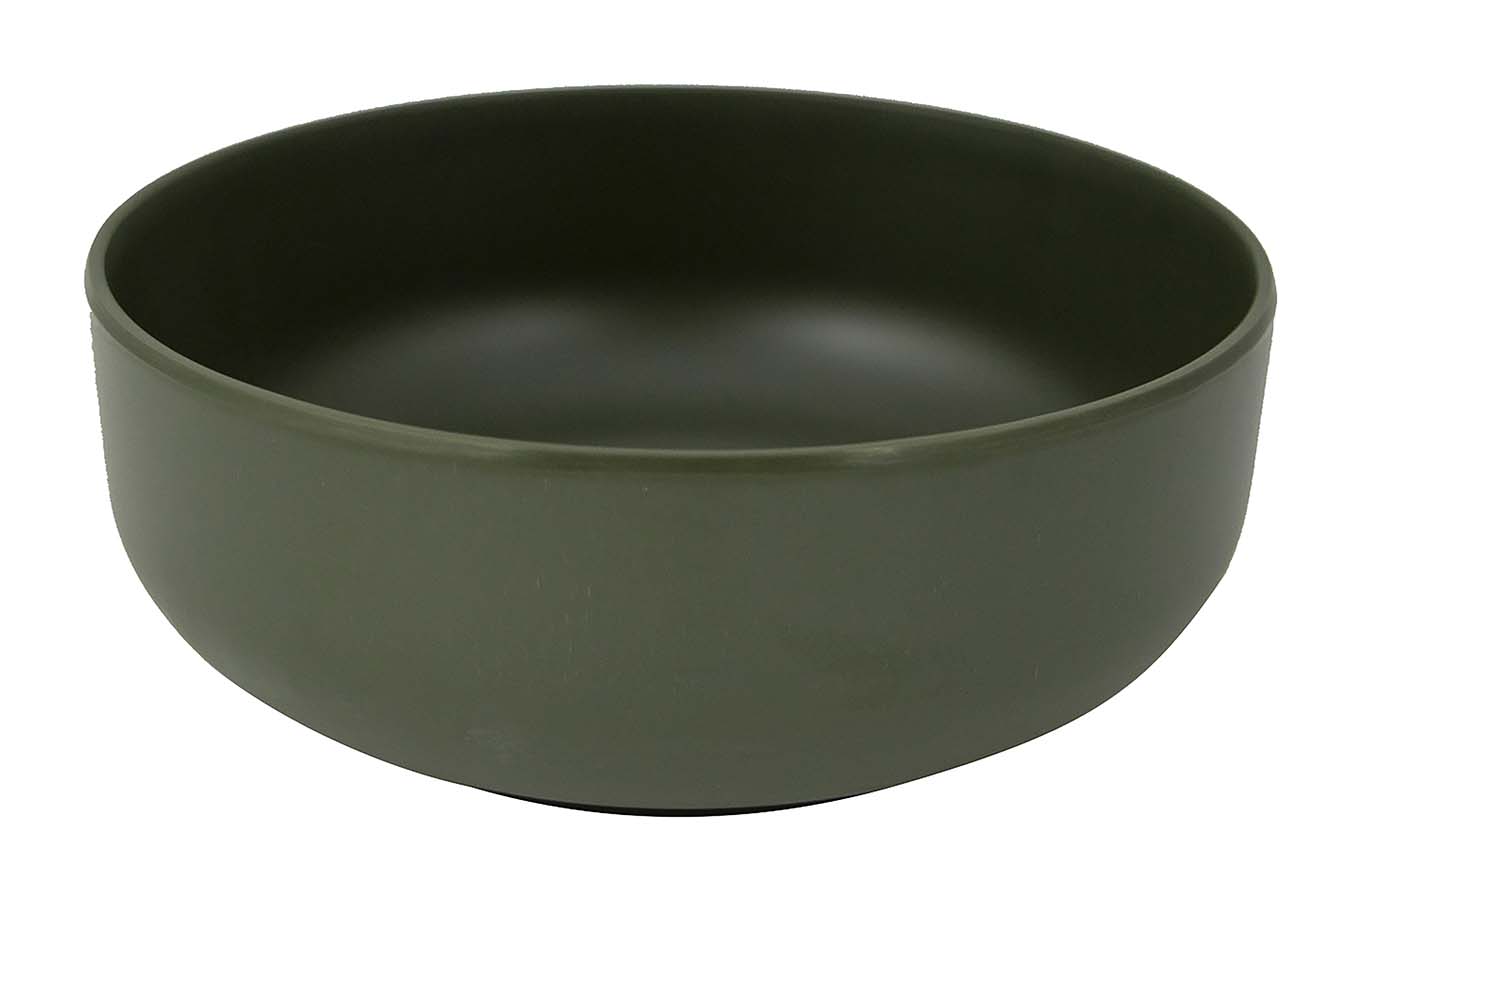 Bo-Camp - Industrial collection - Tableware - Patom - Melamine - 16 Pieces - Green detail 2